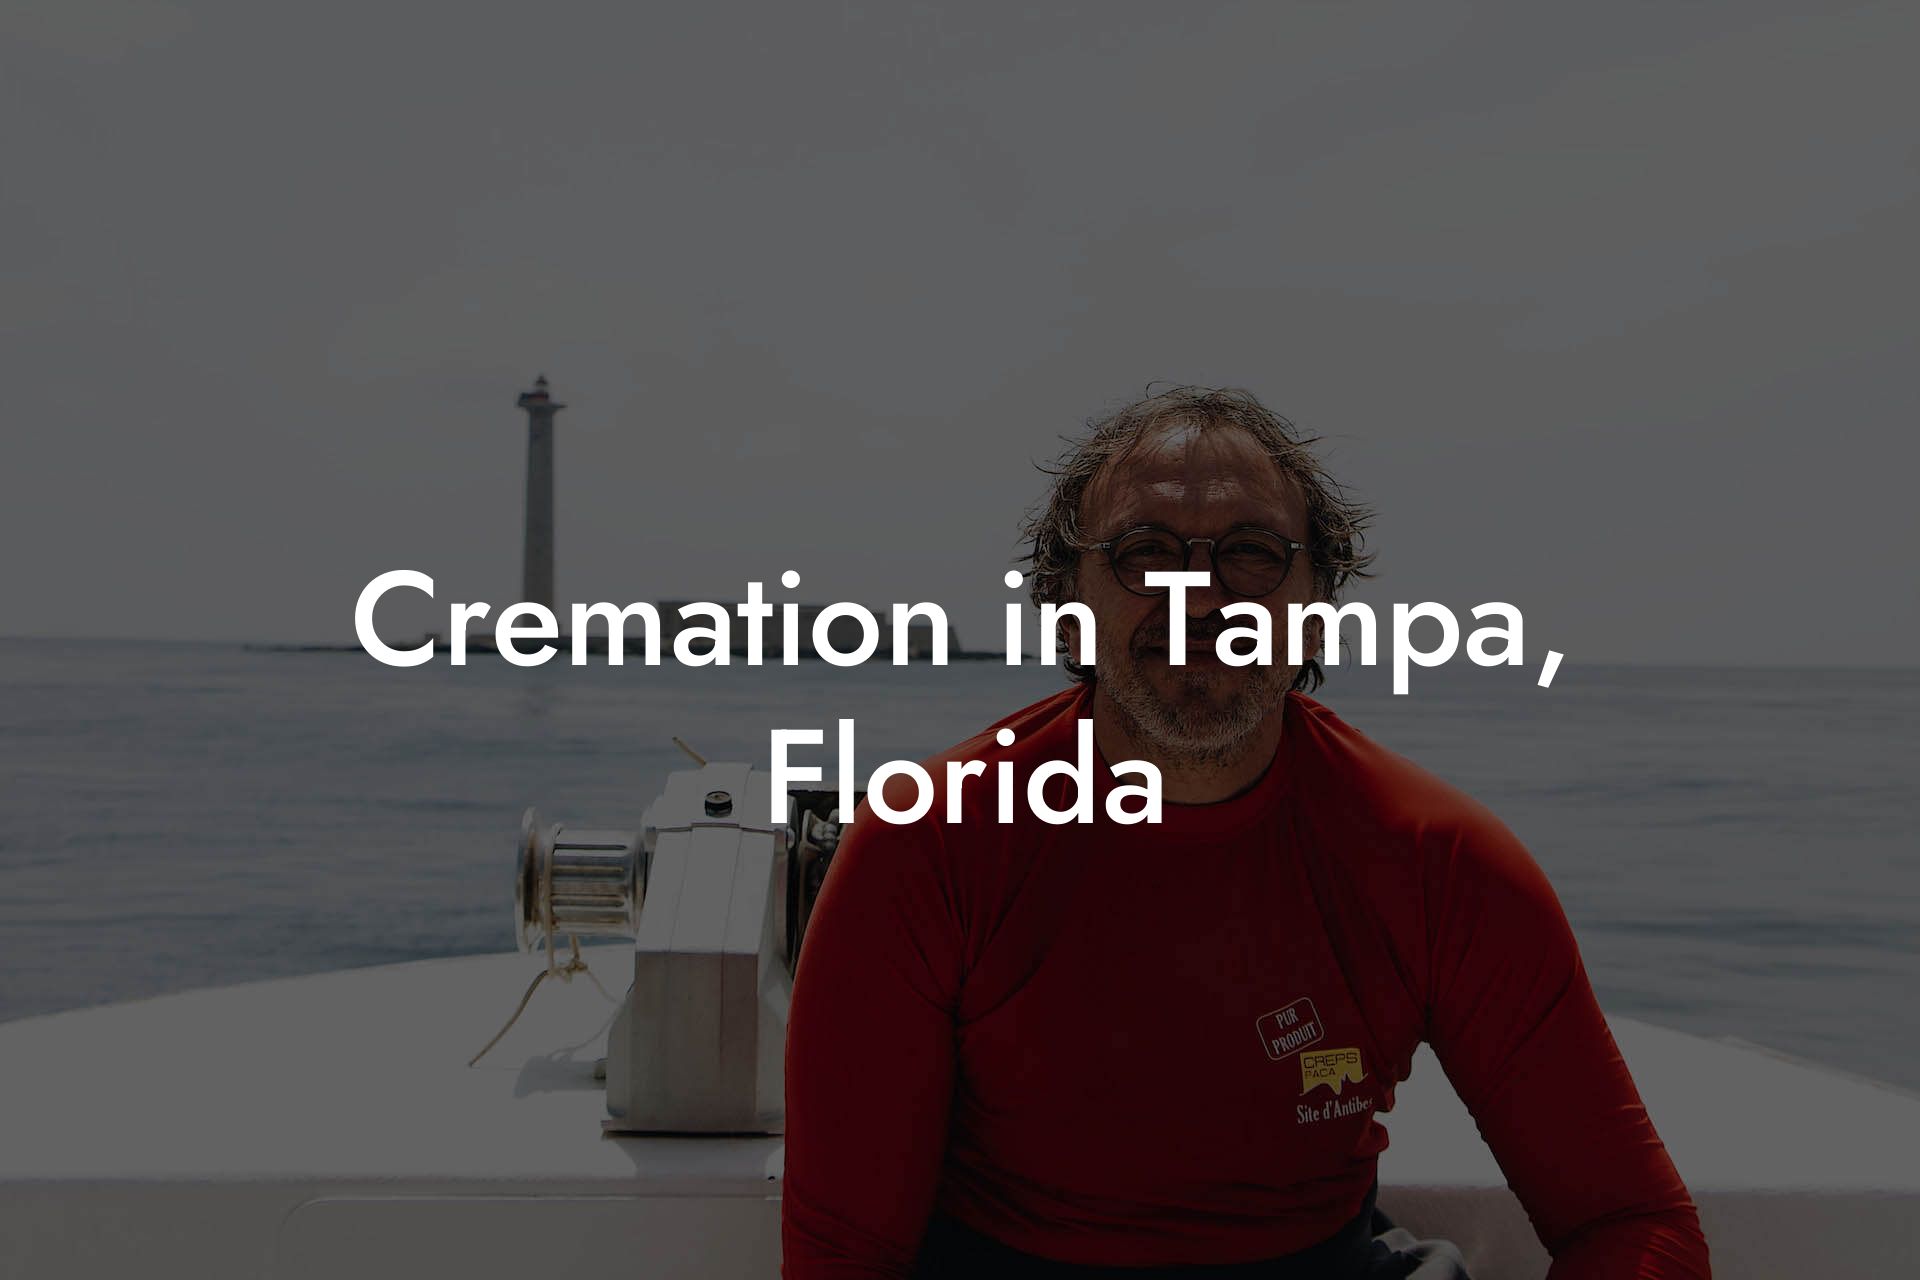 Cremation in Tampa, Florida